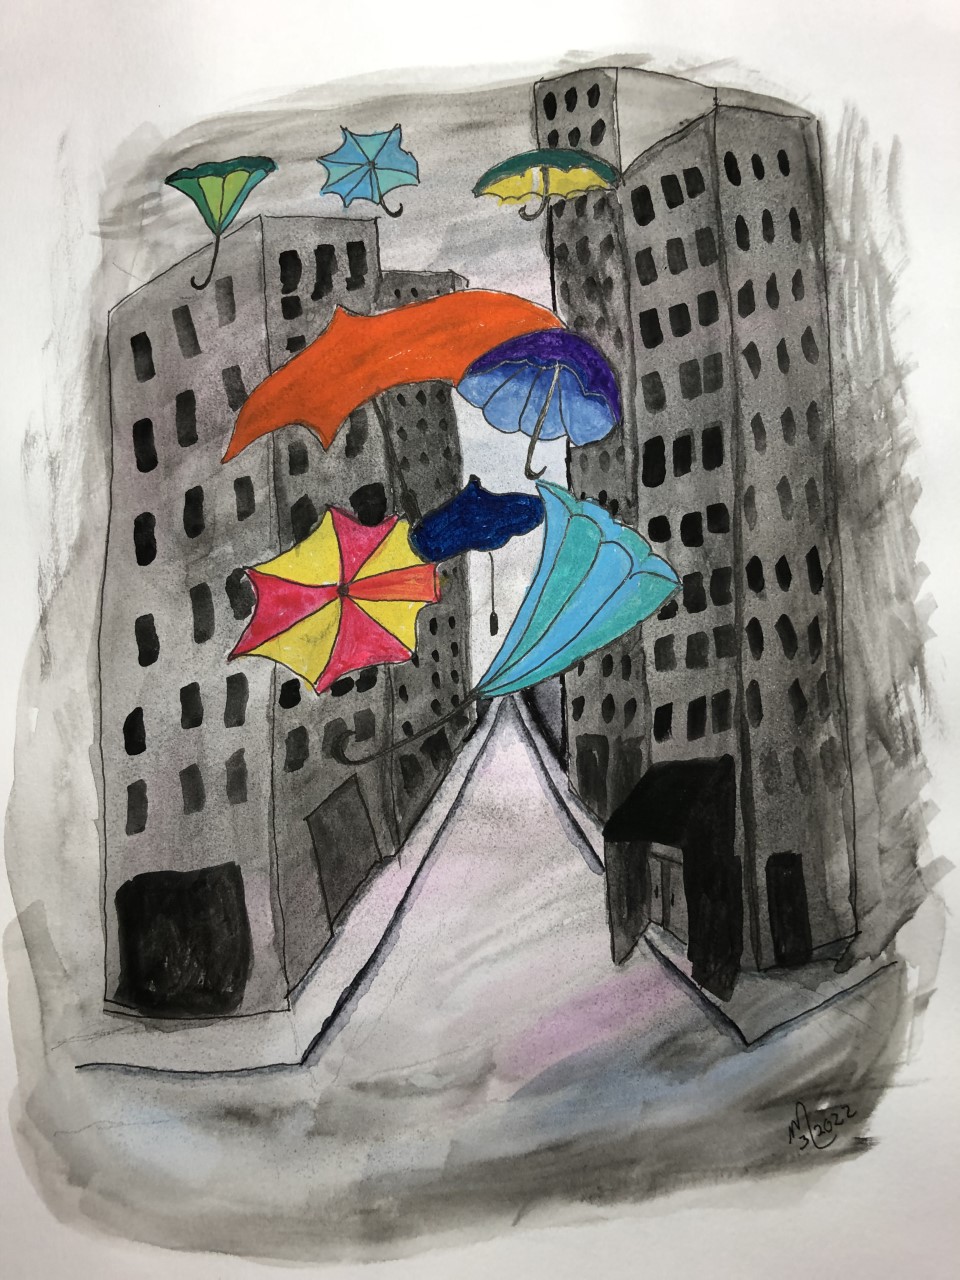 Image of watercolor and graphite drawing showing colorful umbrellas flying between two rows of tall gray buildings in a street